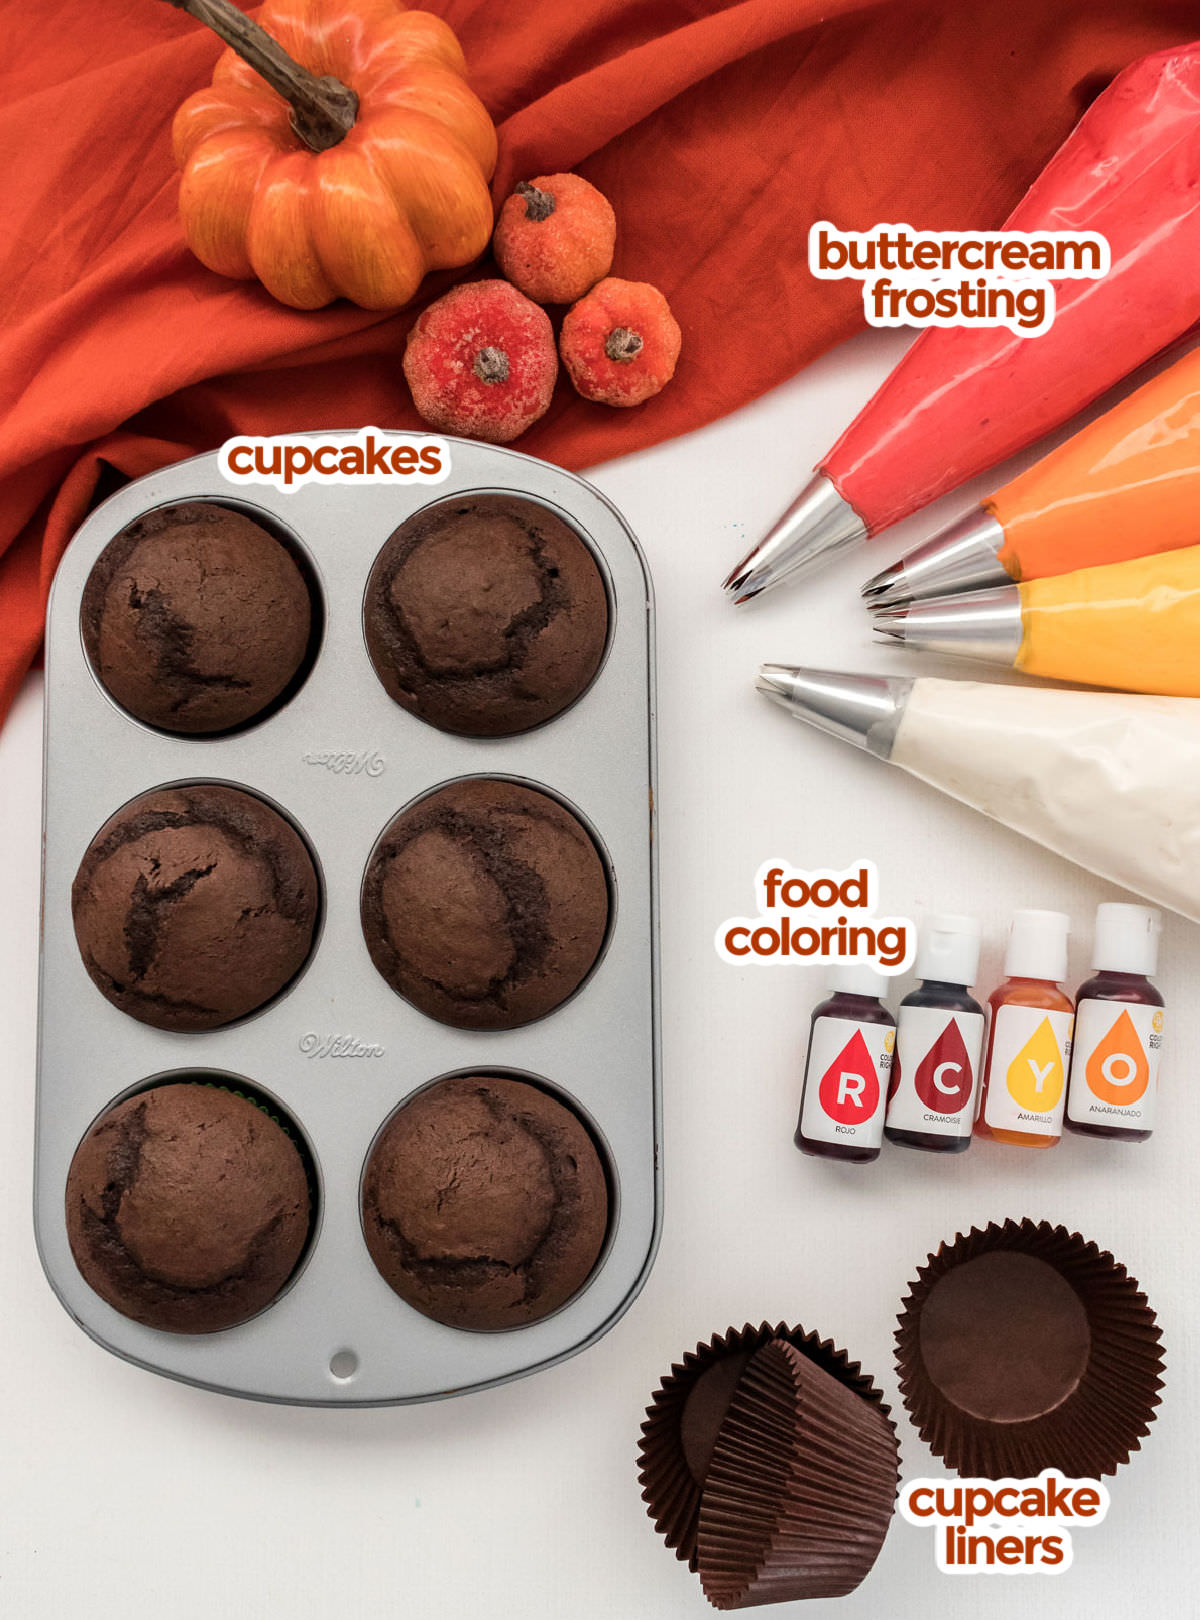 All the ingredients you will need to make Harvest Thanksgiving Cupcakes including chocolate cupcakes, buttercream frosting, food coloring and cupcake liners.